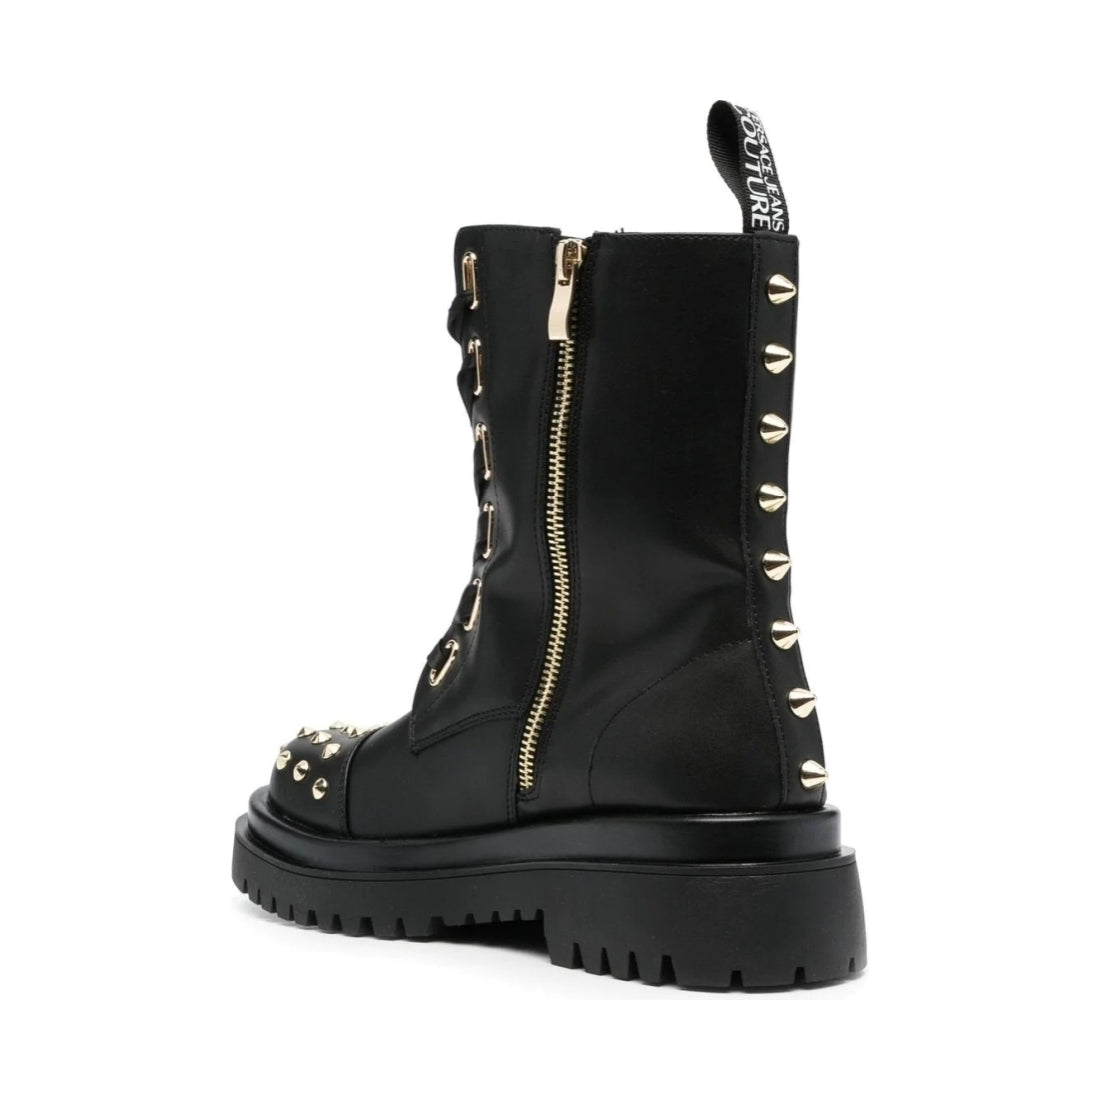 Versace Jeans Couture womens black casual closed booties | Vilbury London